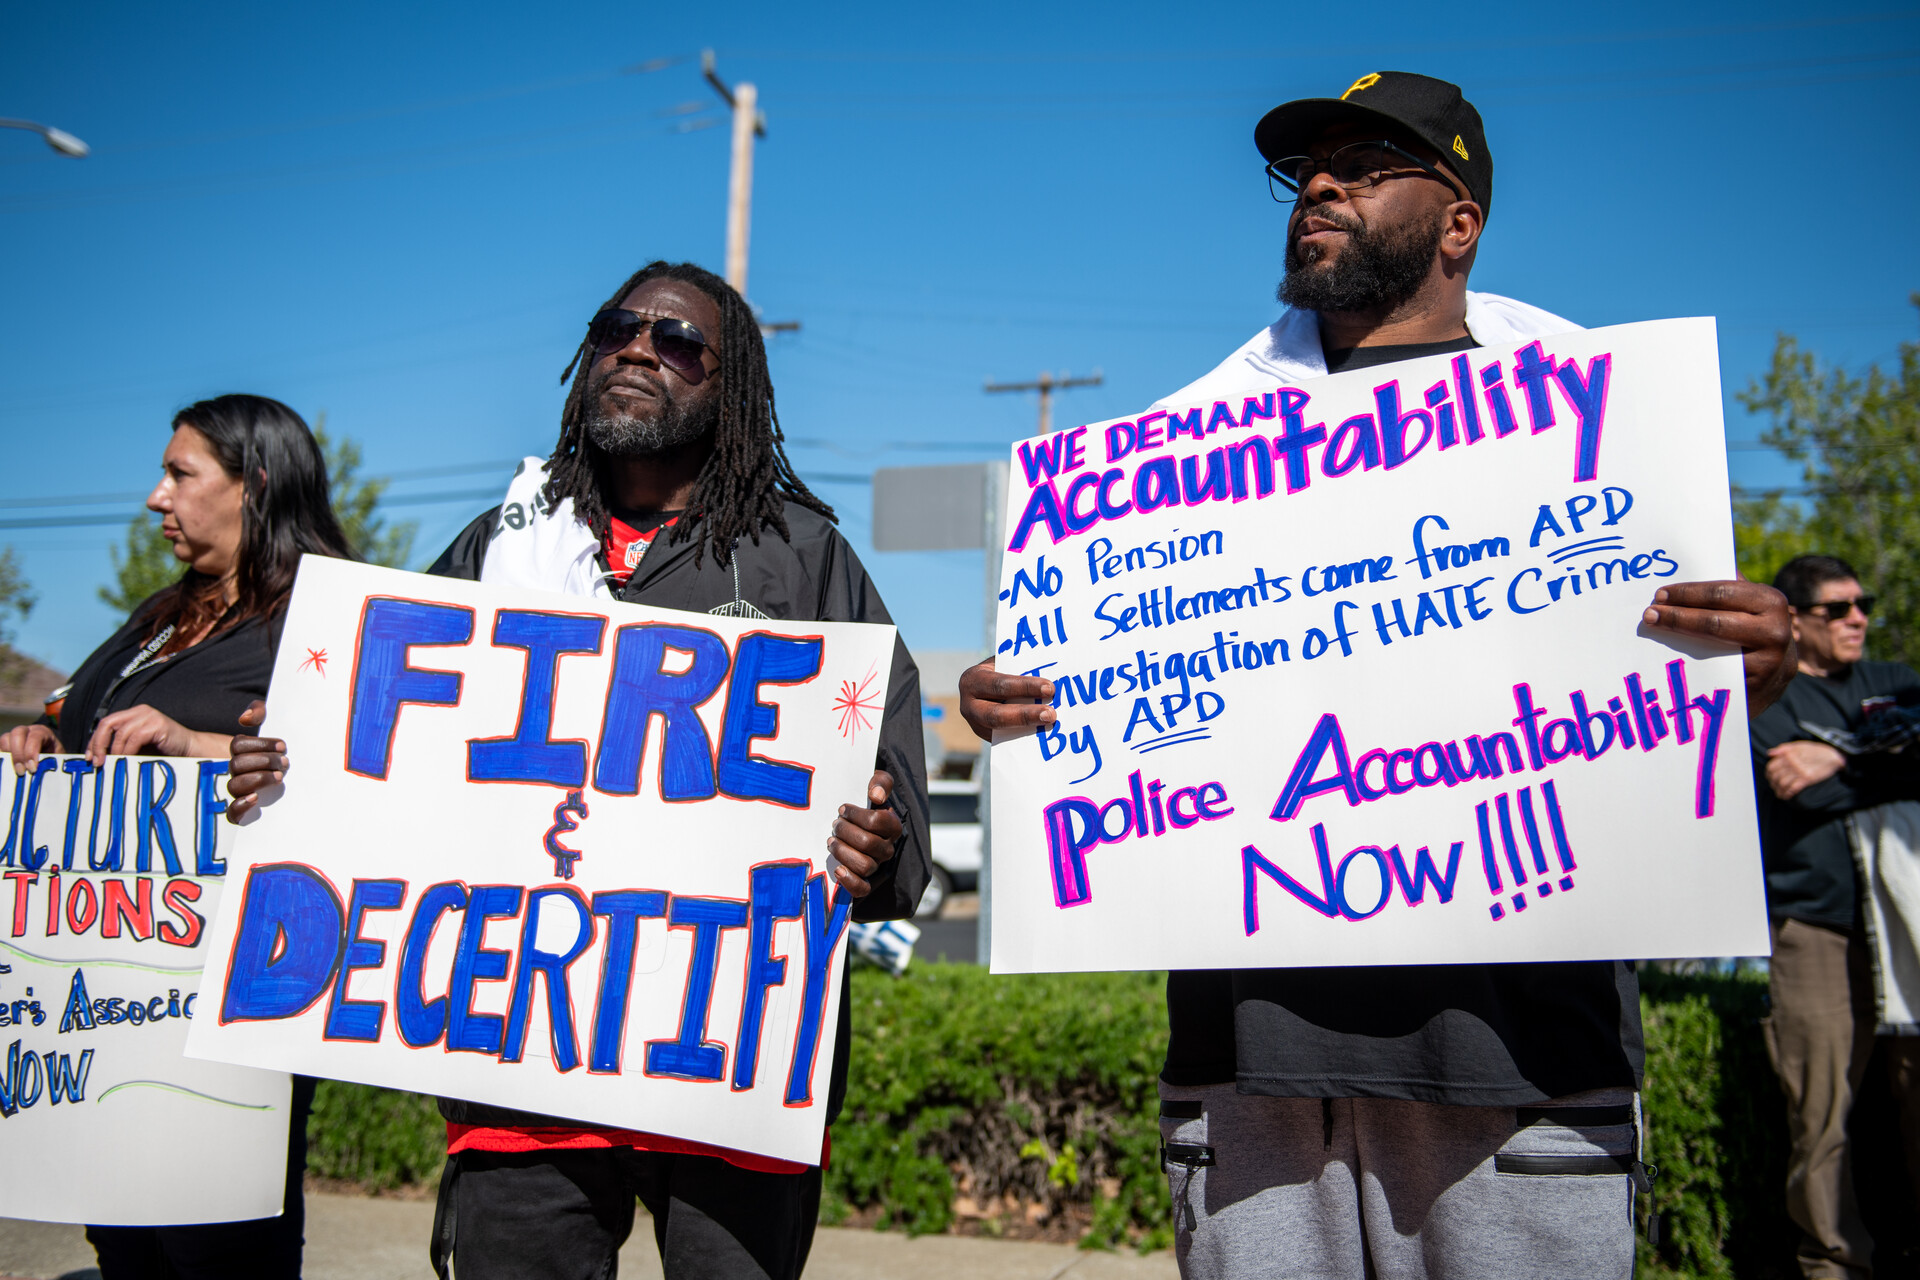 Two Black men, and one woman hold signs at a rally. One sign says: 'Fire & Decertify.' The others says 'We demand accountability.'